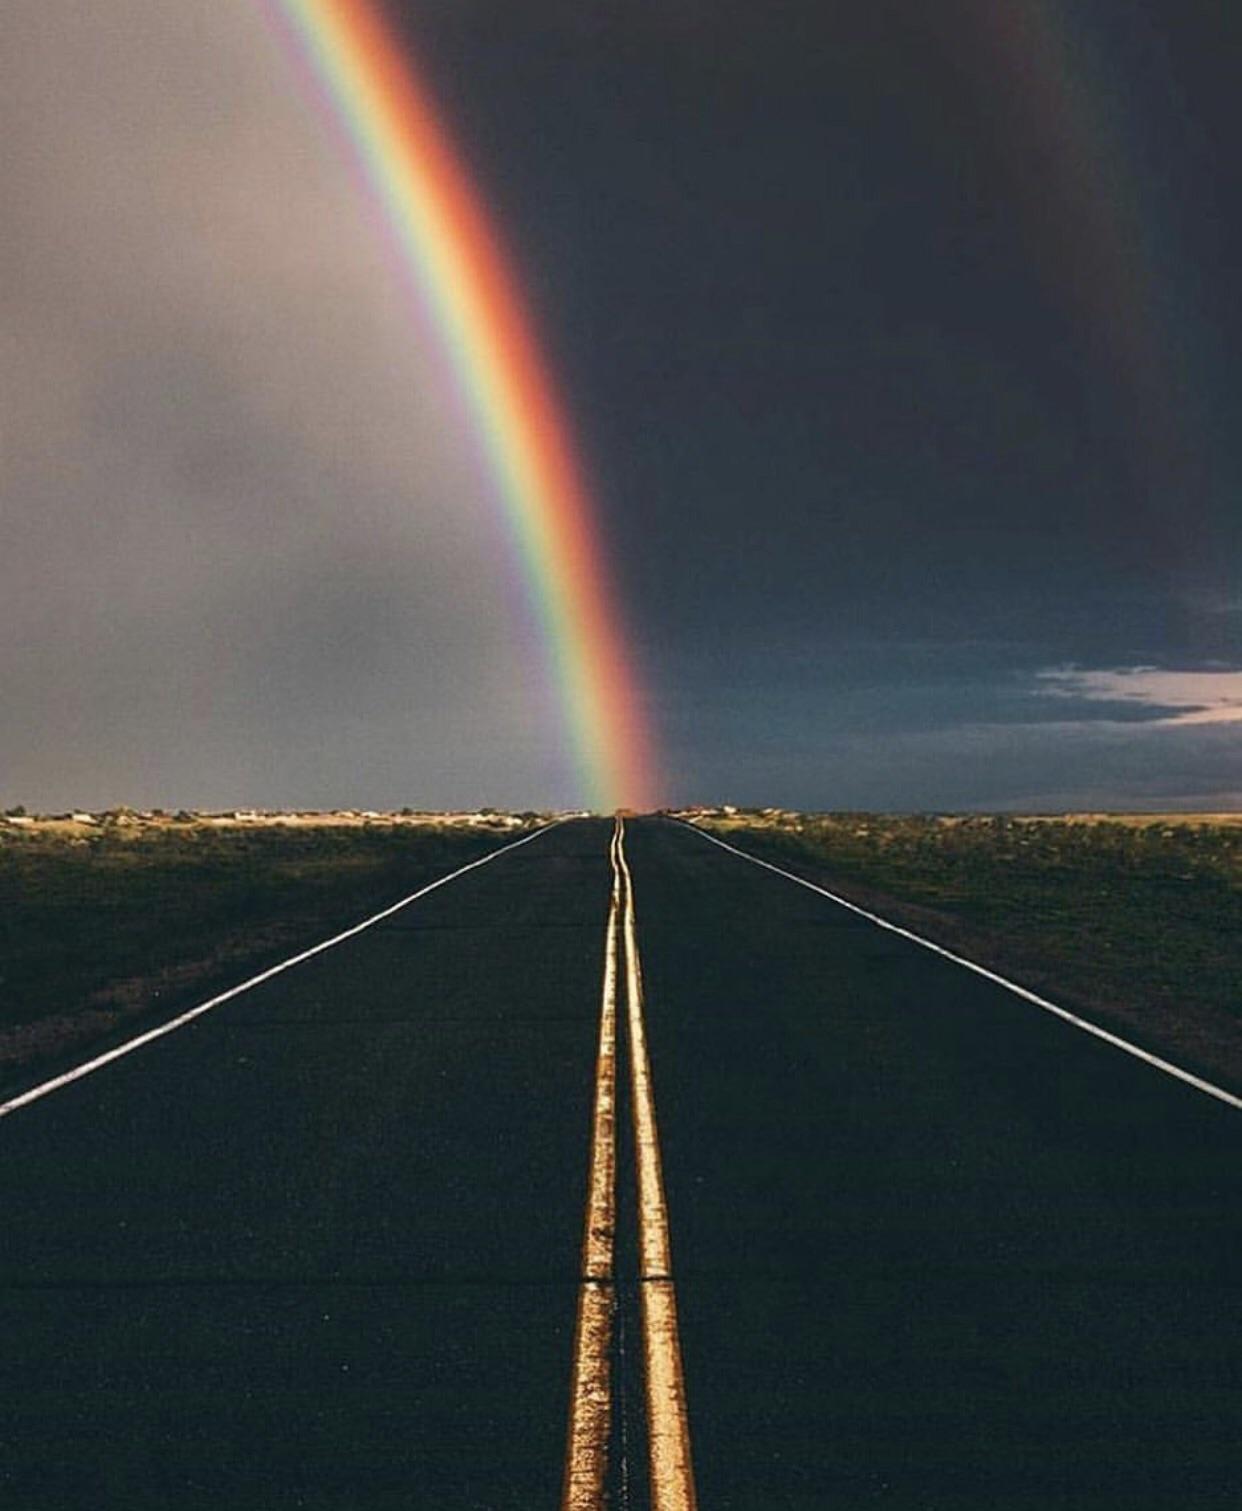 Where the rainbow meets the road - CO